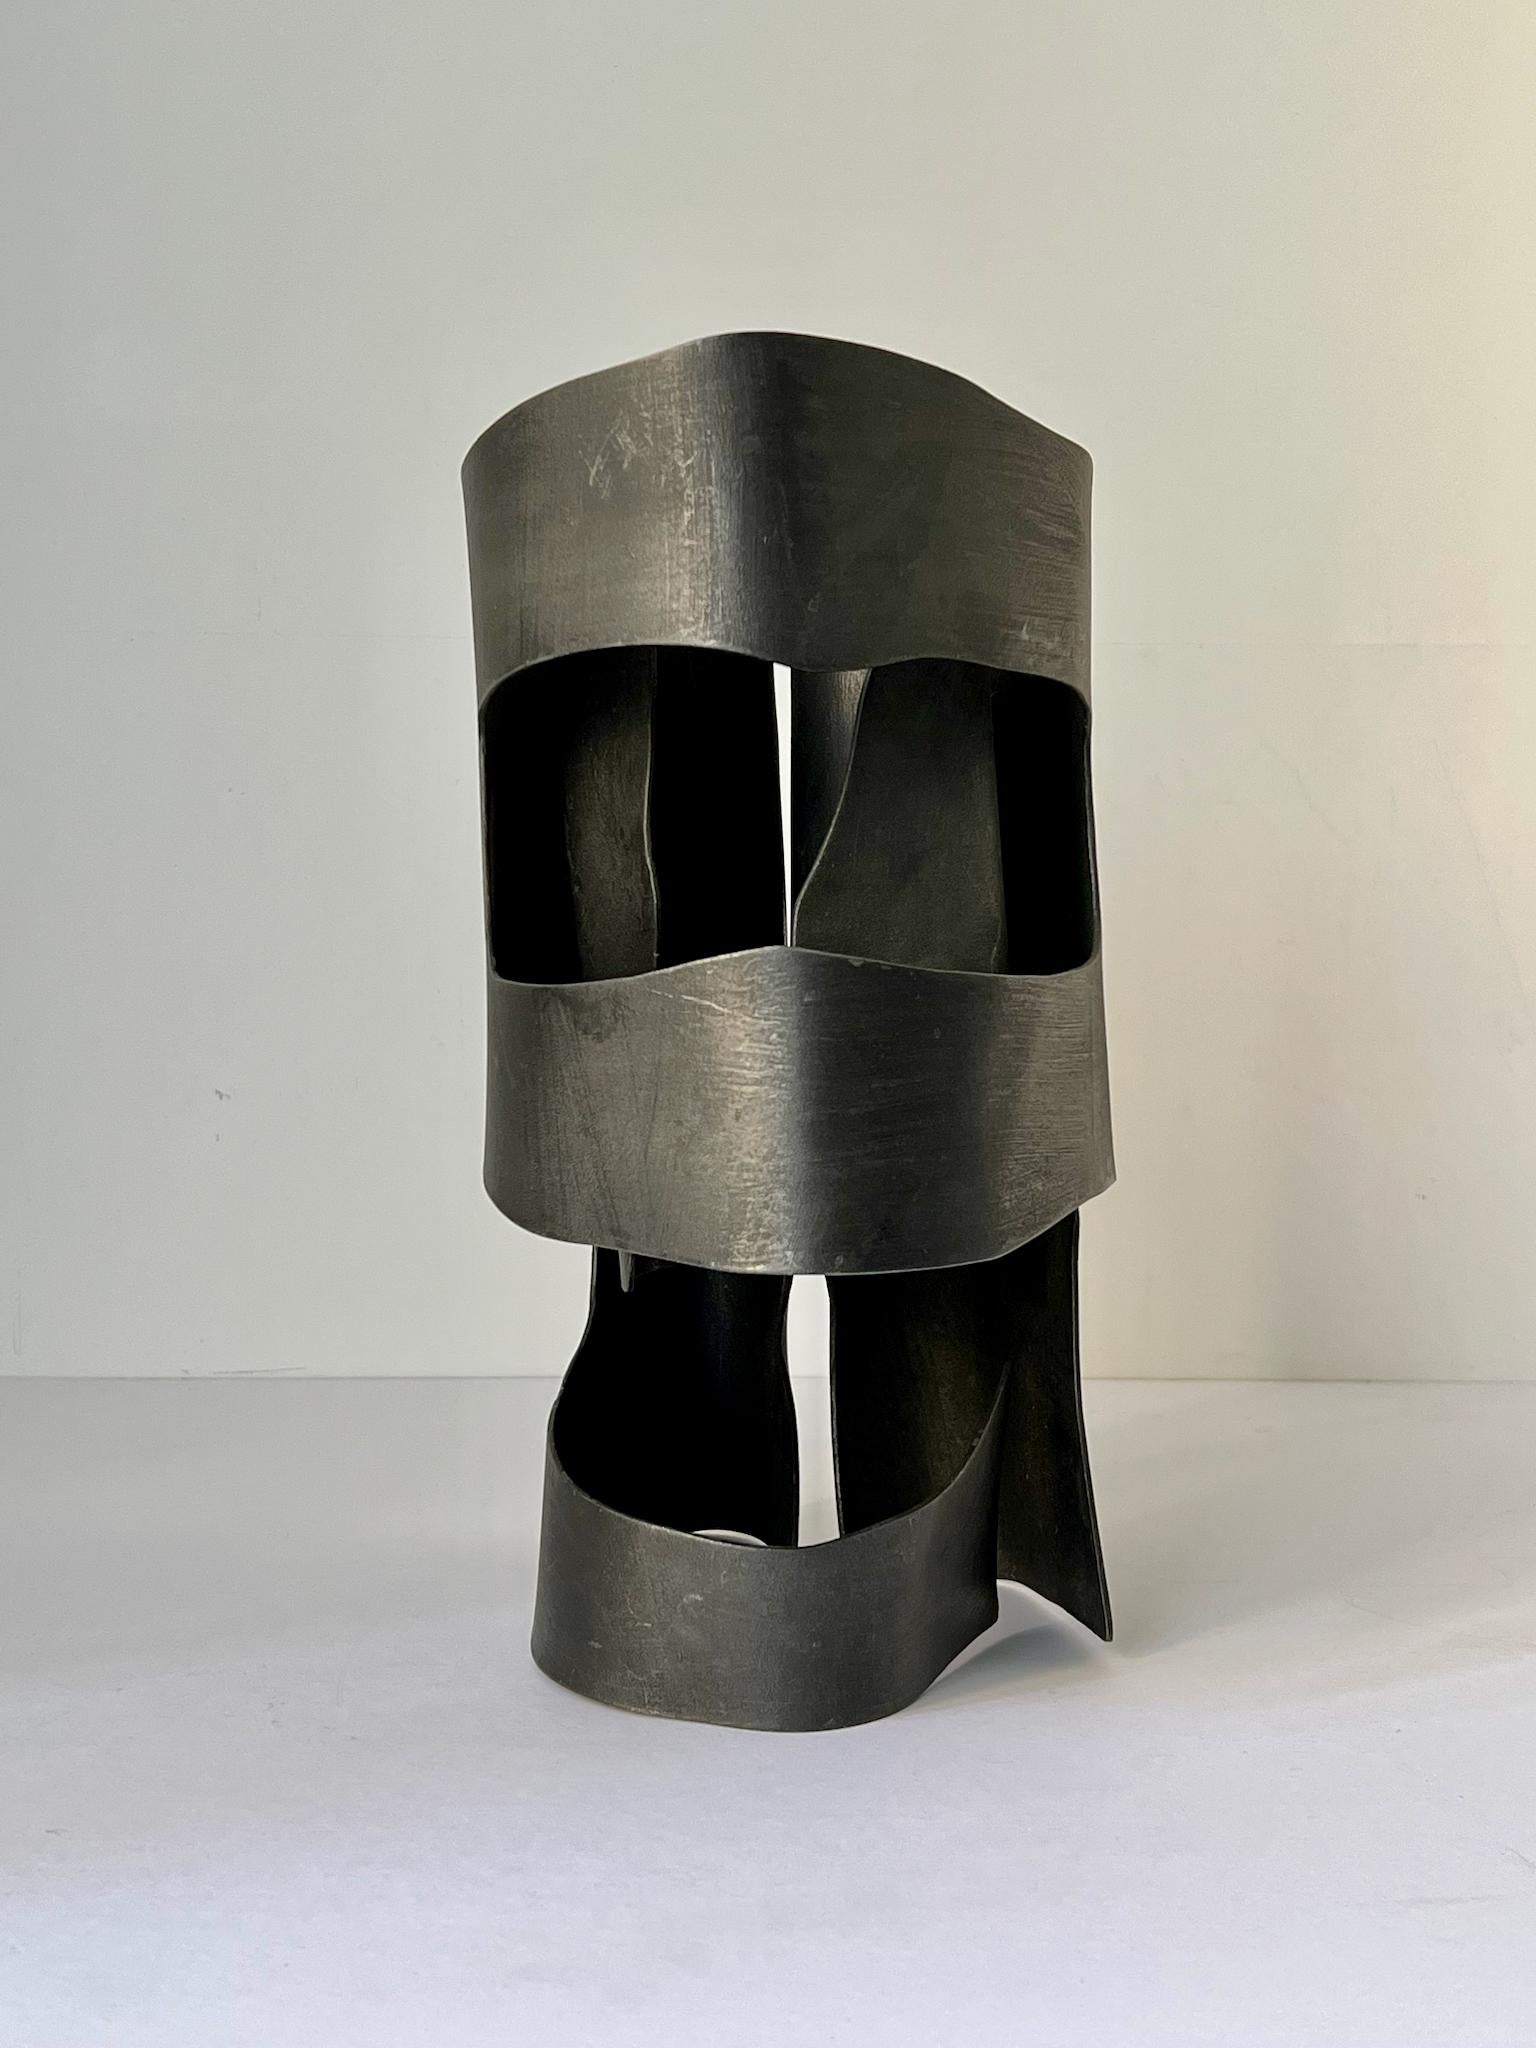 *Please contact us for availability of this item.*

Abstract steel sculpture, in the form of a helmet; from the estate of the artist June Barrington-Ward (1922-2002) and attributed to her. England 1970s. Unsigned.

Good original condition with some